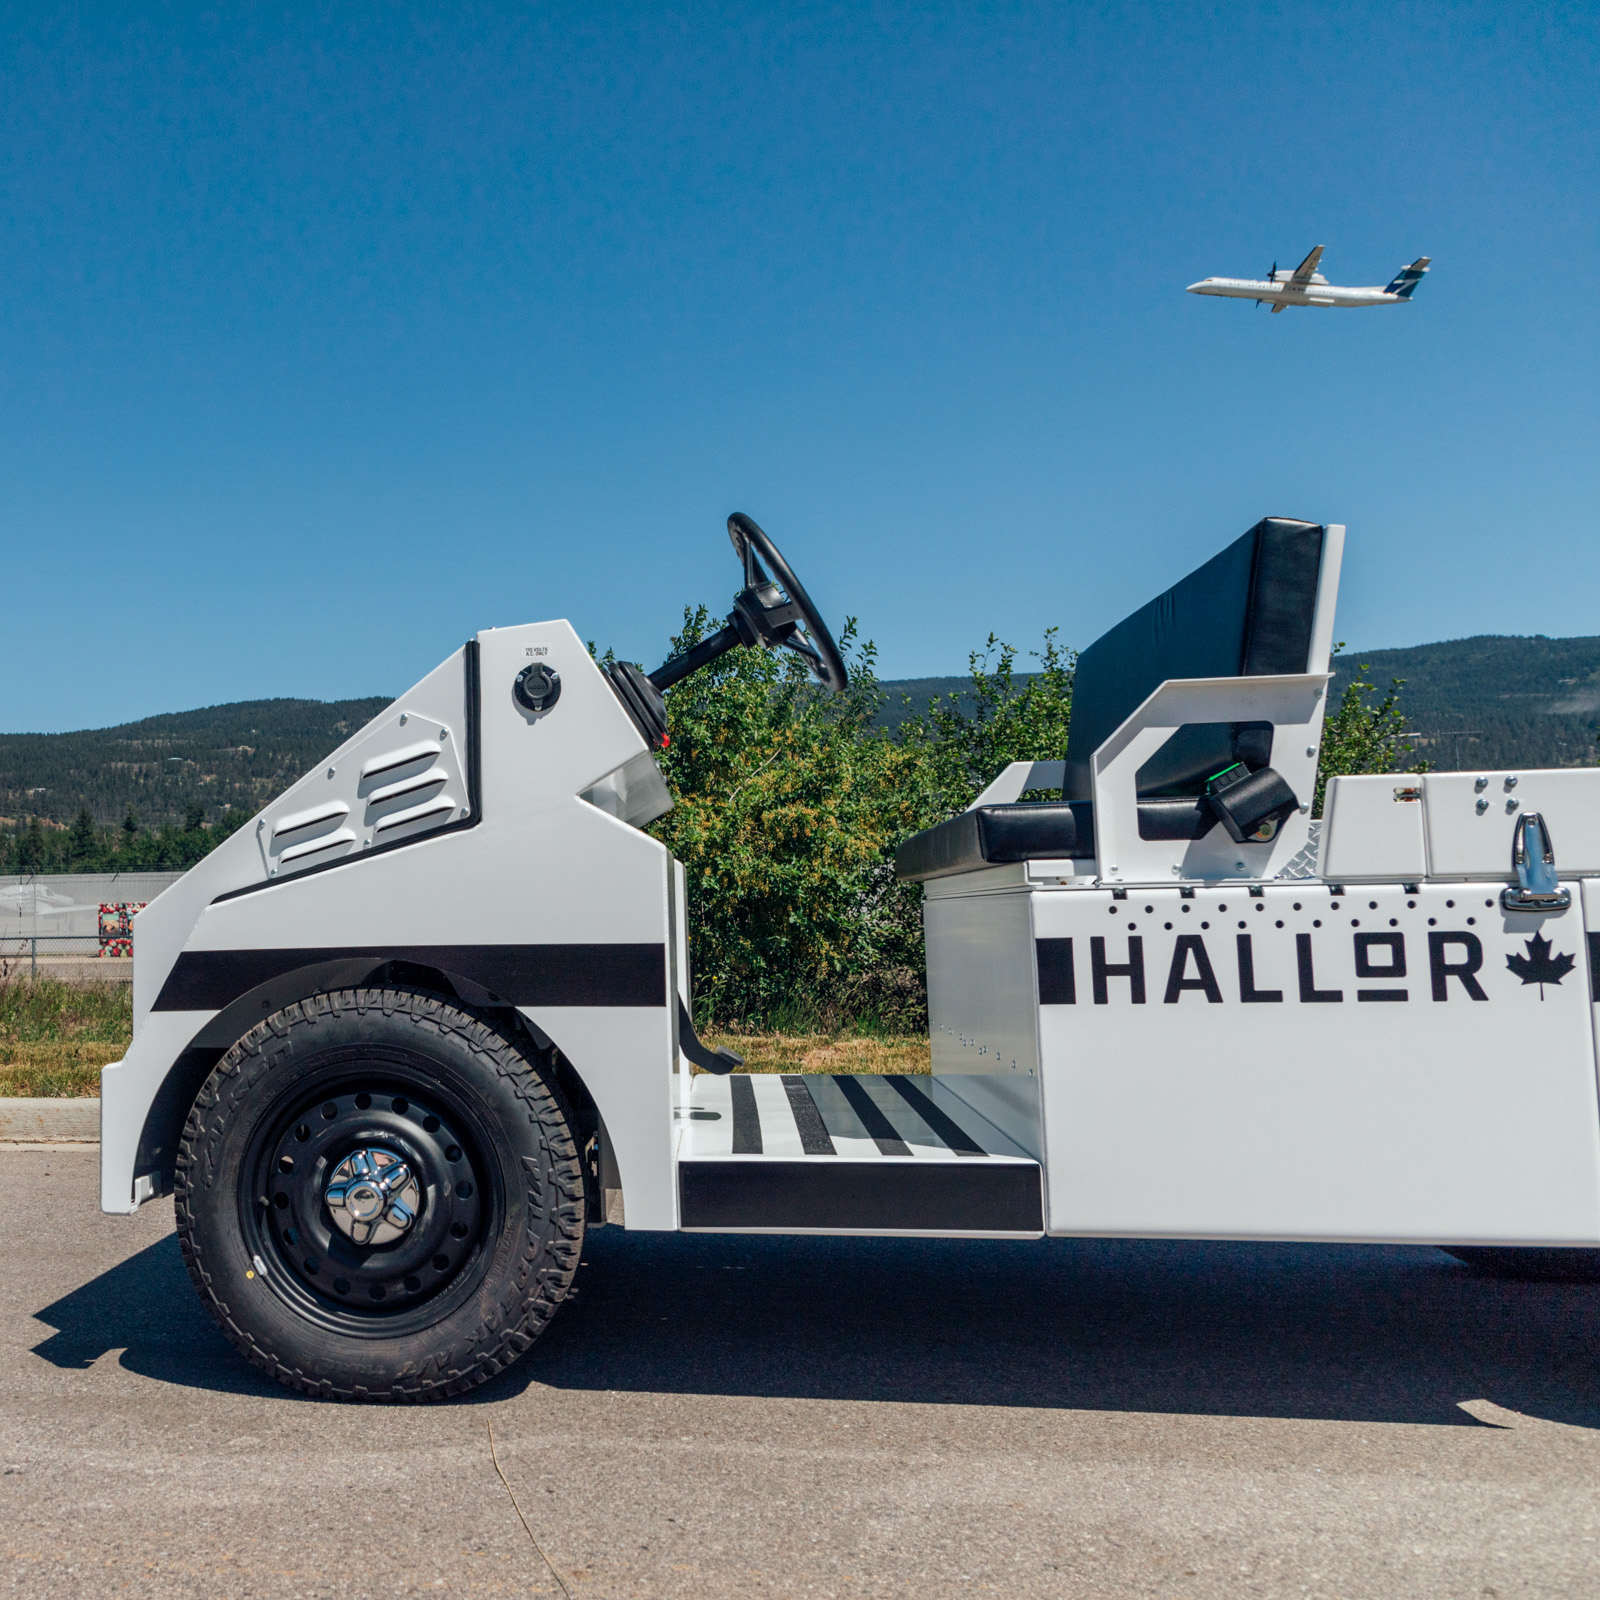 Hallor is currently in sales talks with a number of airlines and GSE contractors.